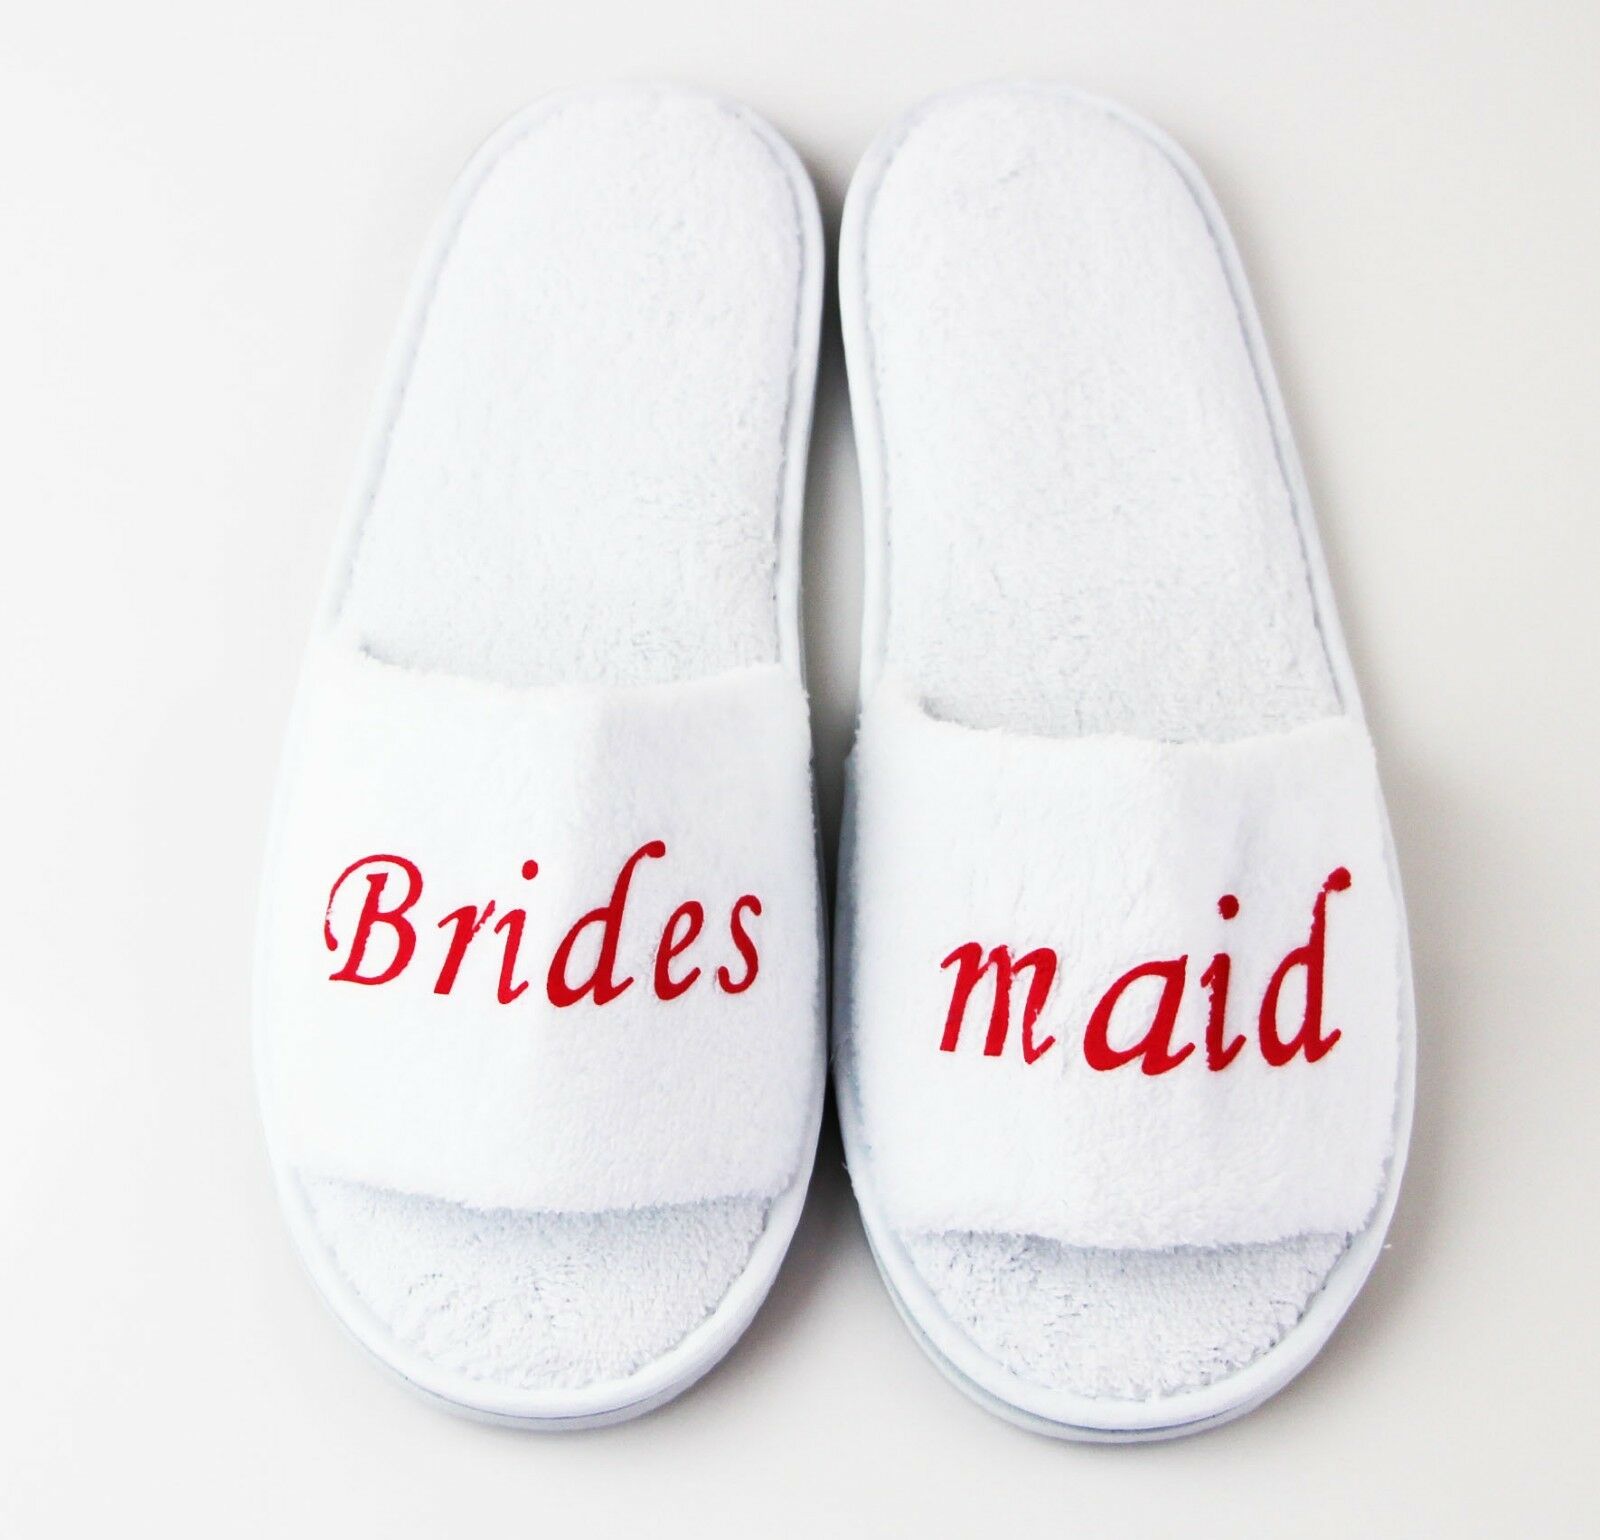 Bridal Slippers Bride To Be Bridesmaid Maid Of Honour Wedding White Pink Gold